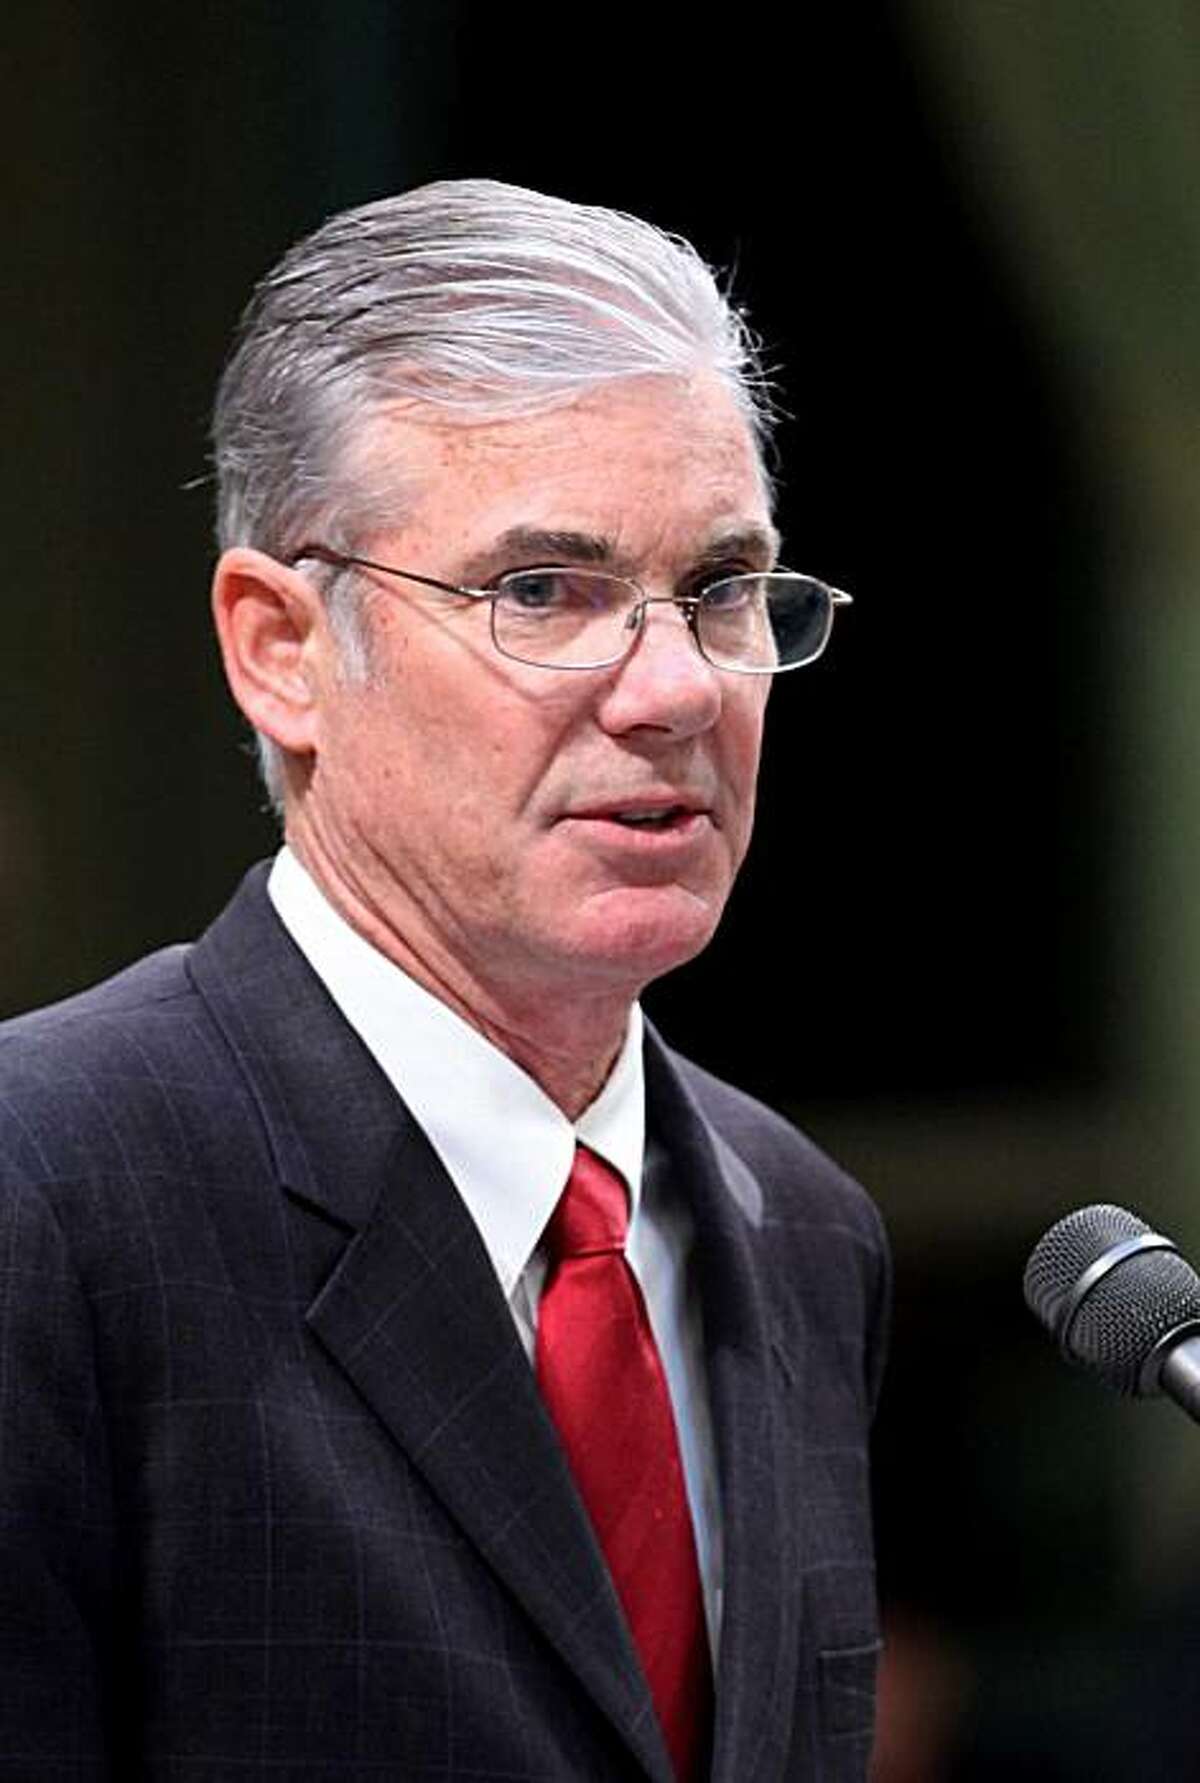 FILE - This May 5, 2010 picture shows Assemblyman Tom Torlakson, D-Antioch, who is running for the Superintendent of Public Instruction in the 2010 elections, at the Capitol in Sacramento, Calif.